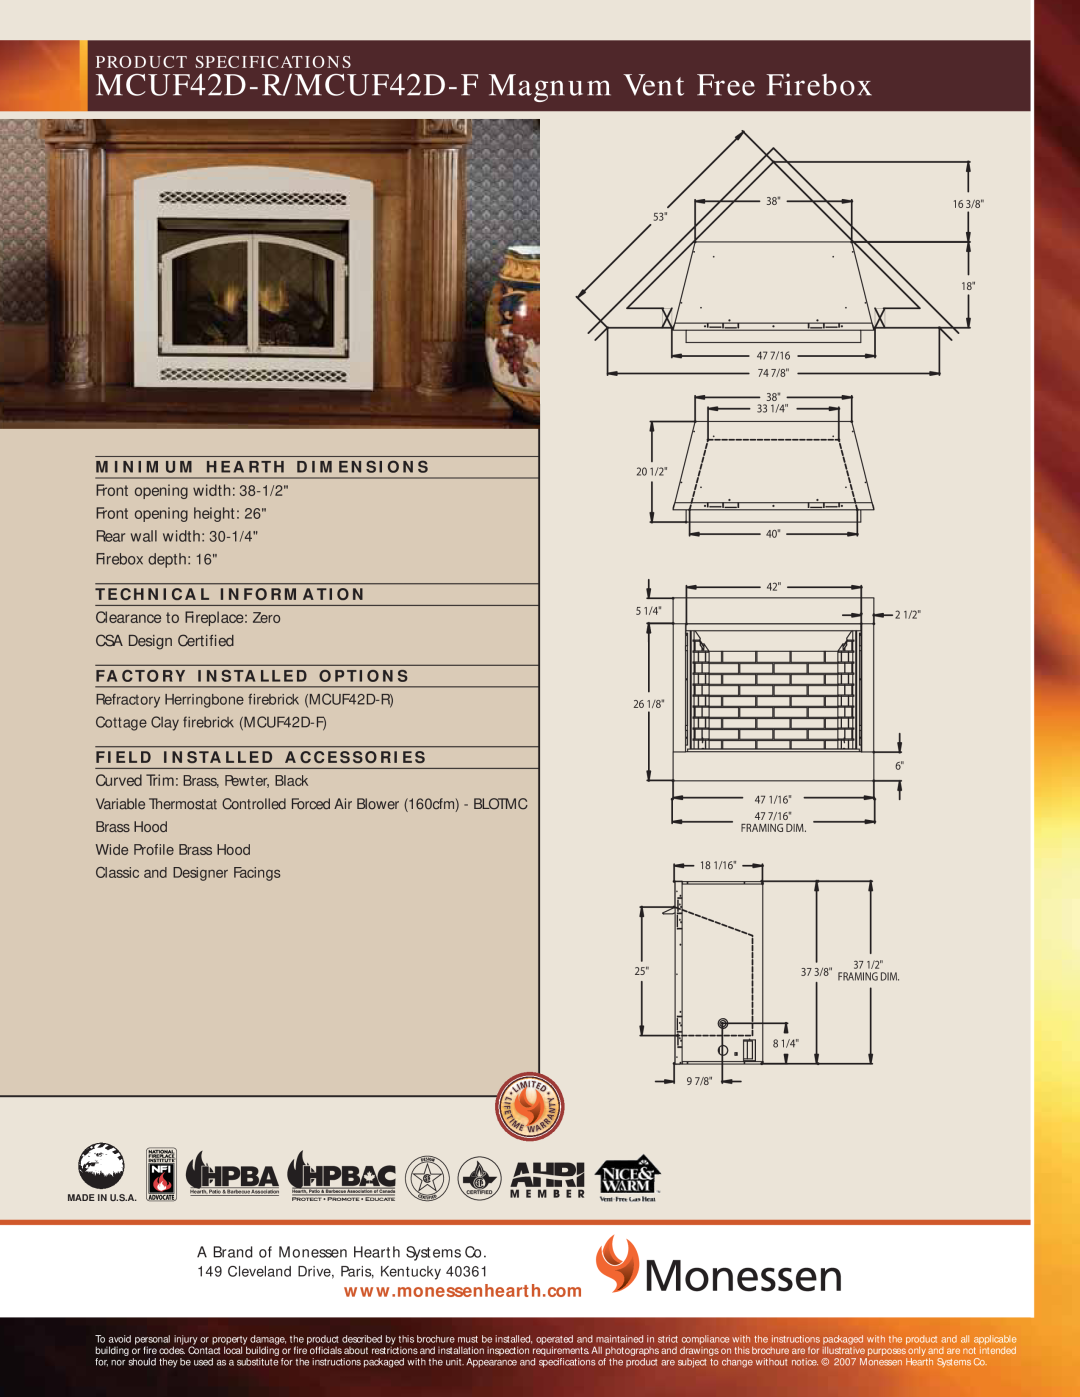 Monessen Hearth specifications MCUF42D-R/MCUF42D-FMagnum Vent Free Firebox, Product Specifications, 16 3/8, 2 1/2 